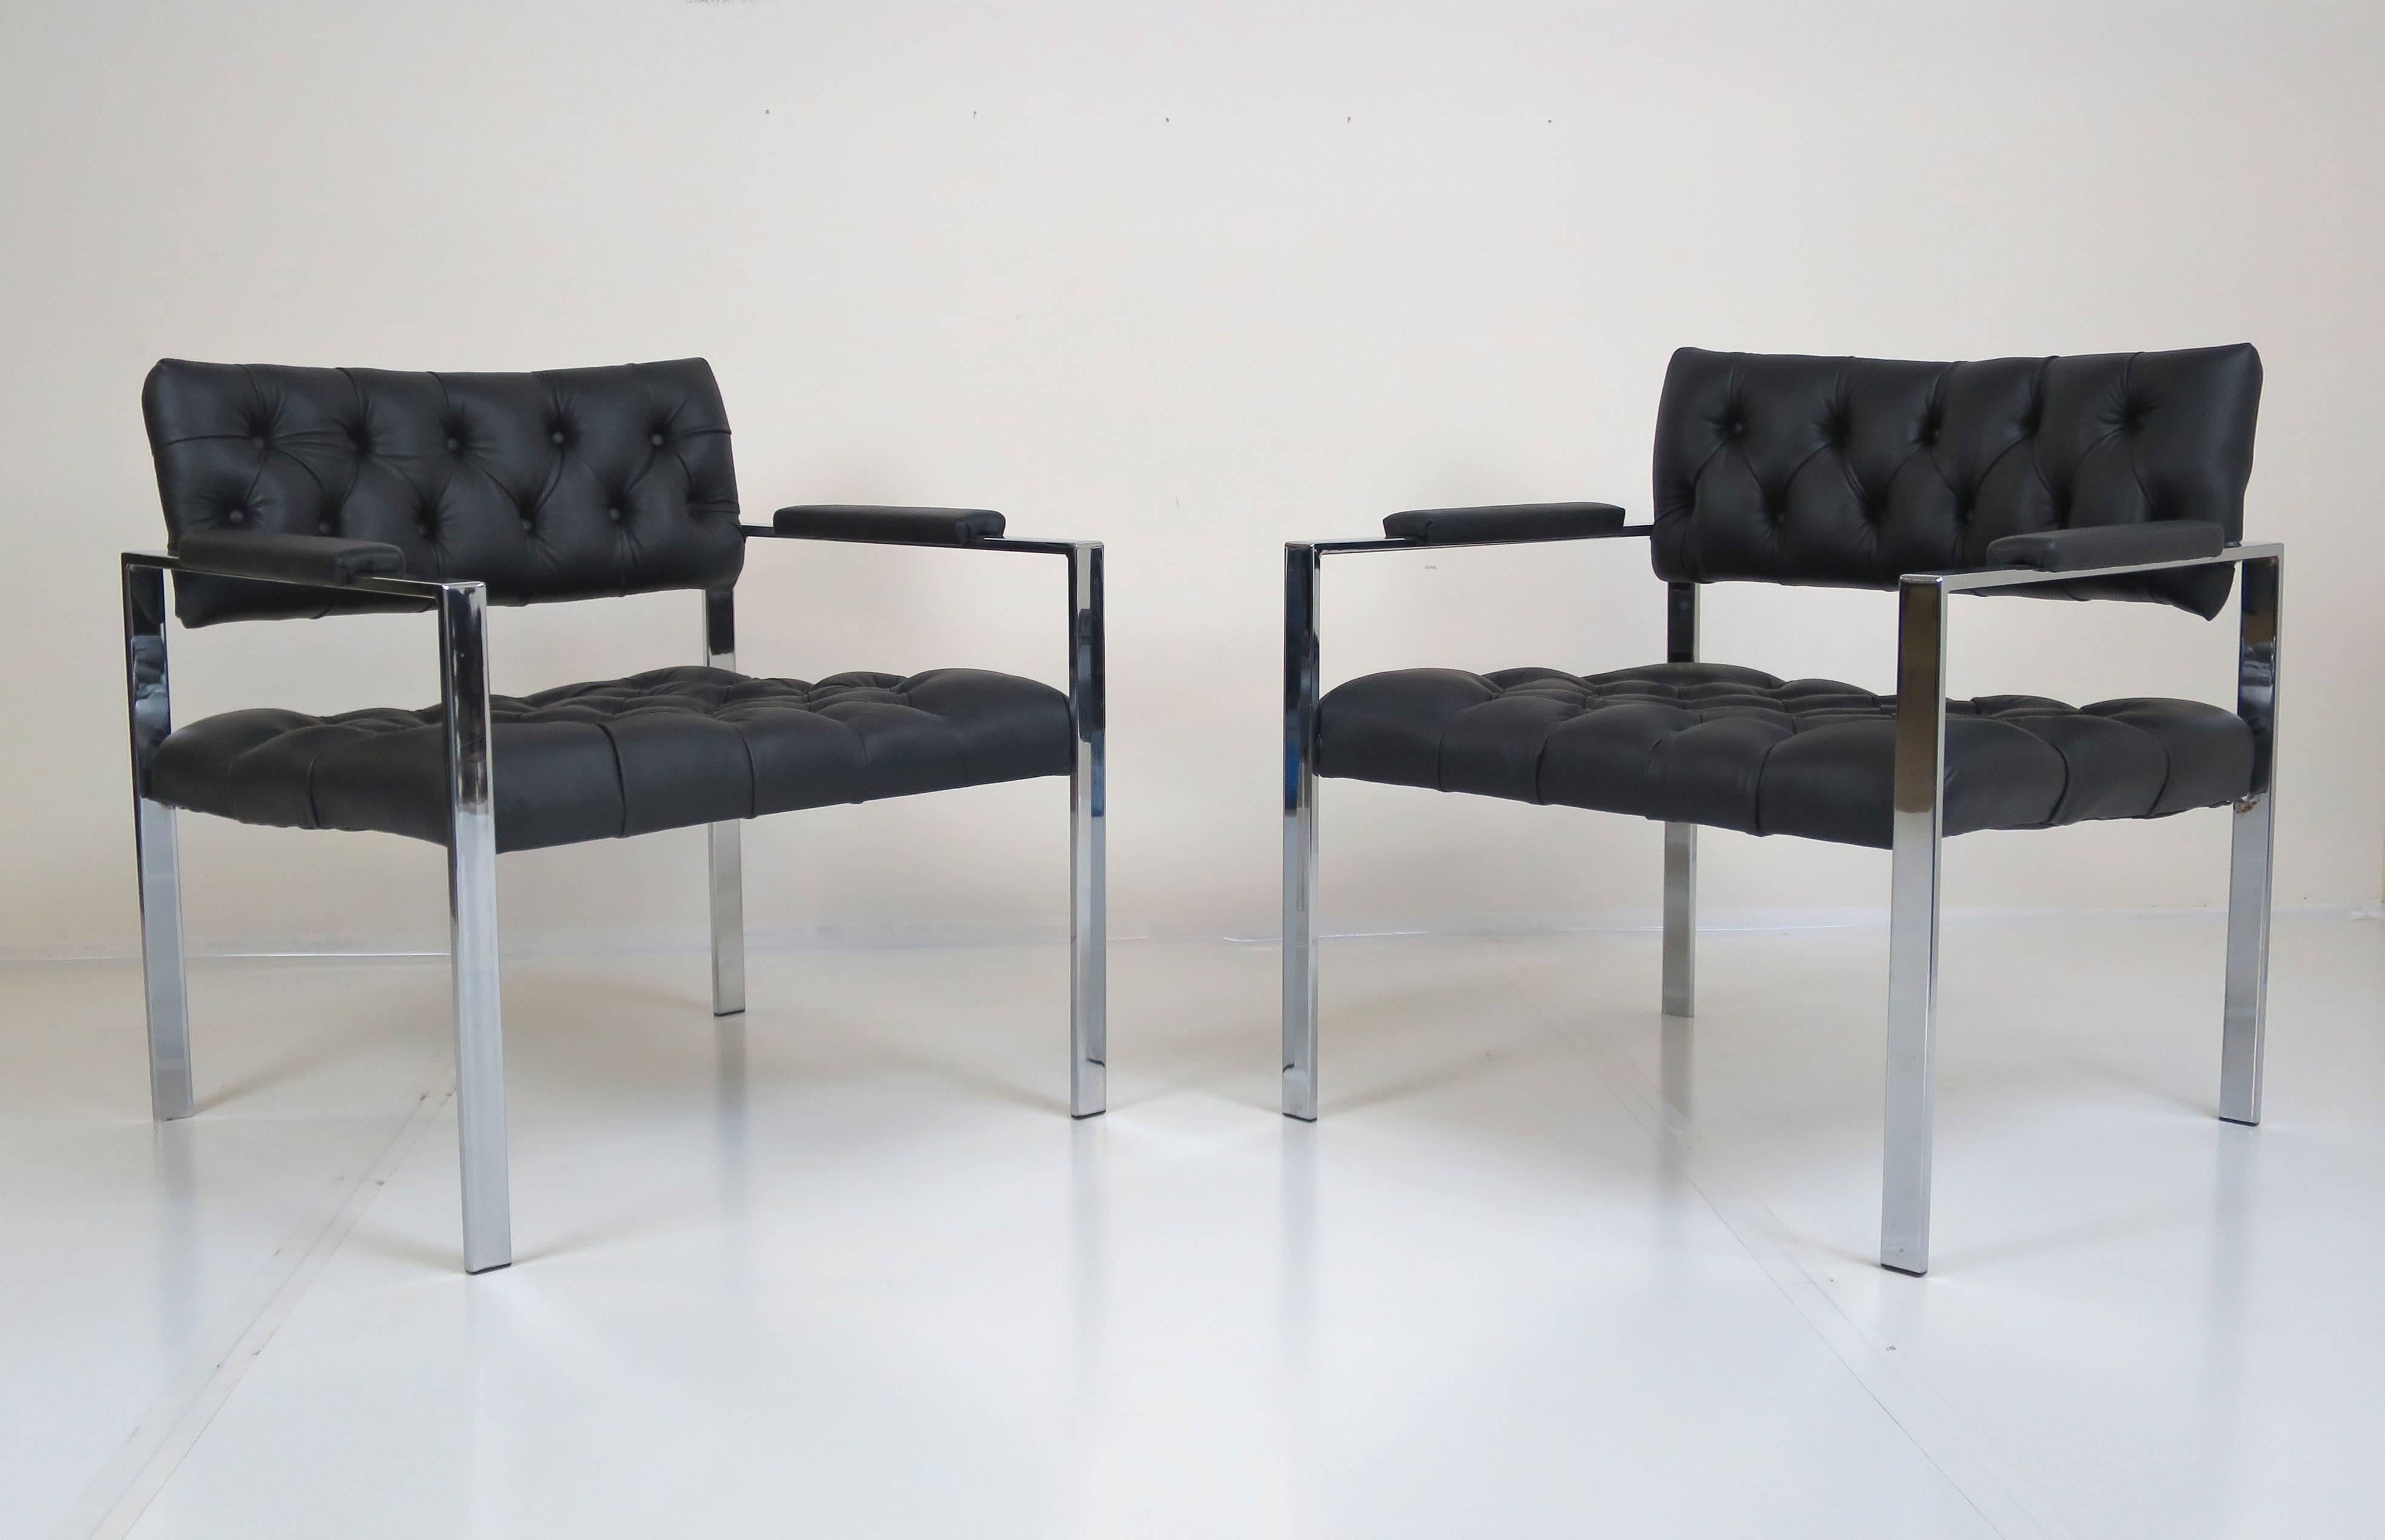 Pair of leather tufted lounge chairs by Harvey Probber. Comfort and style, this sizable pair of lounge chairs has everything that's needed and nothing more. Original chrome frames show well and clean recent upholstery in black hides. Chairs are